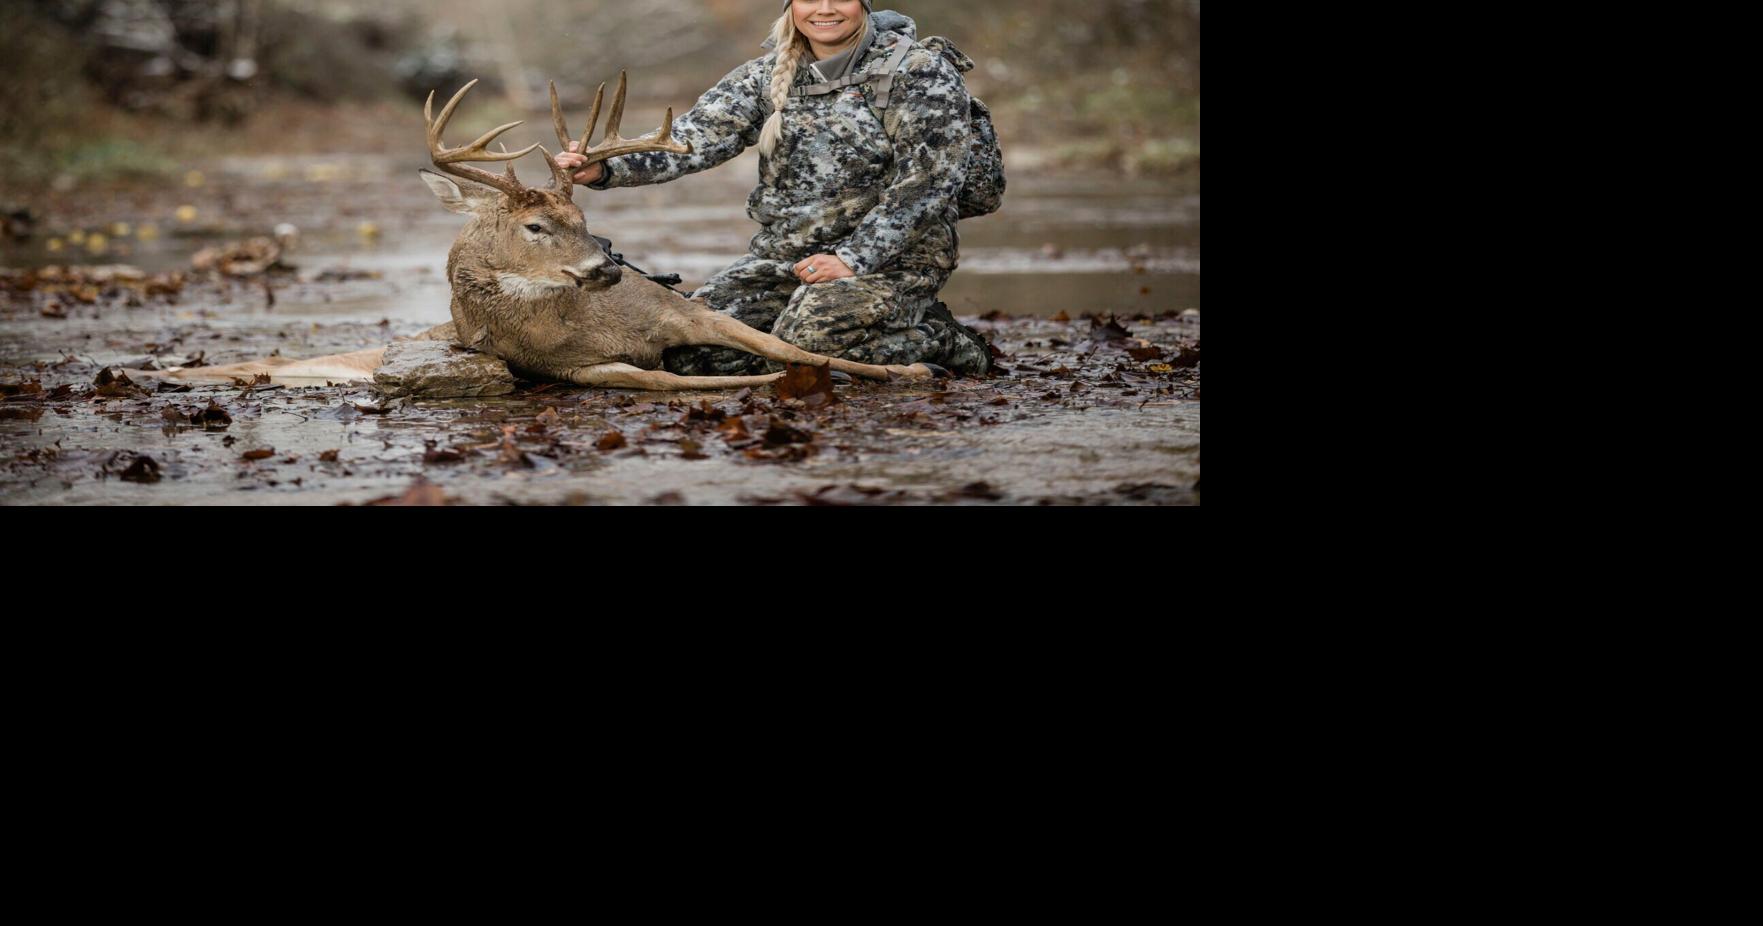 Check out the changes for deer season this fall in Nebraska